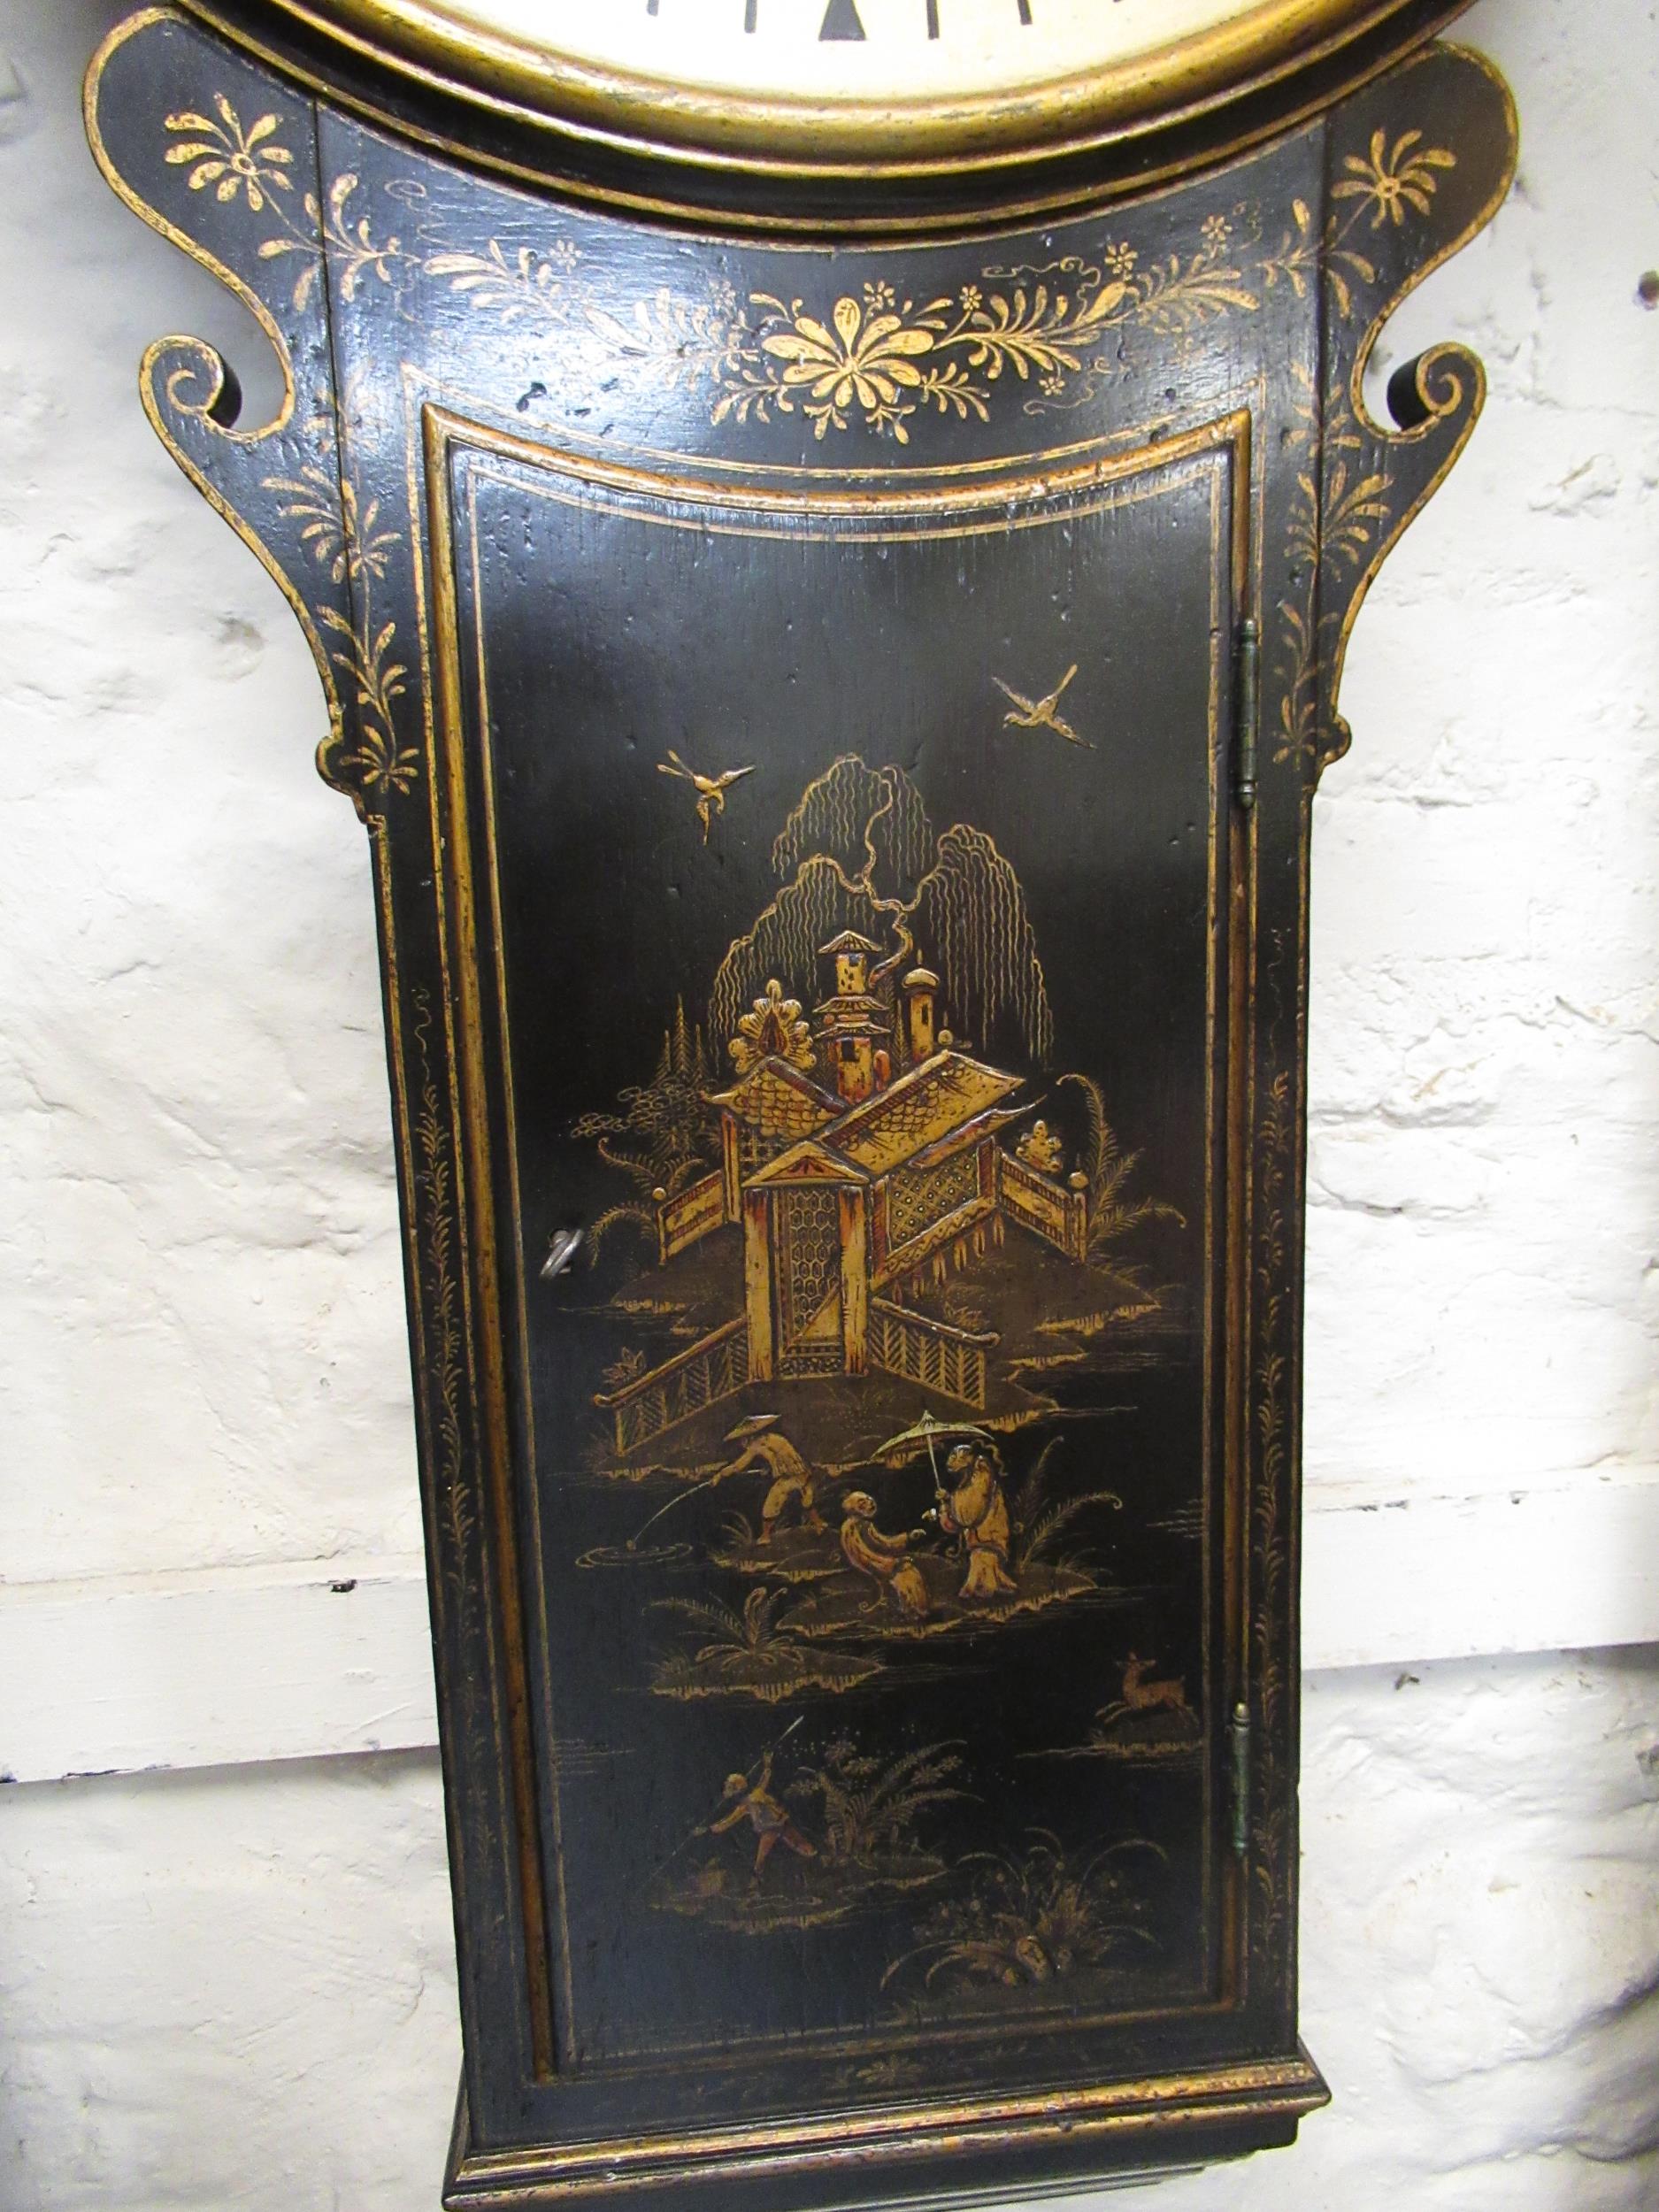 Black chinoiserie lacquer tavern or act of parliament clock, the painted dial with Roman numerals, - Image 2 of 12